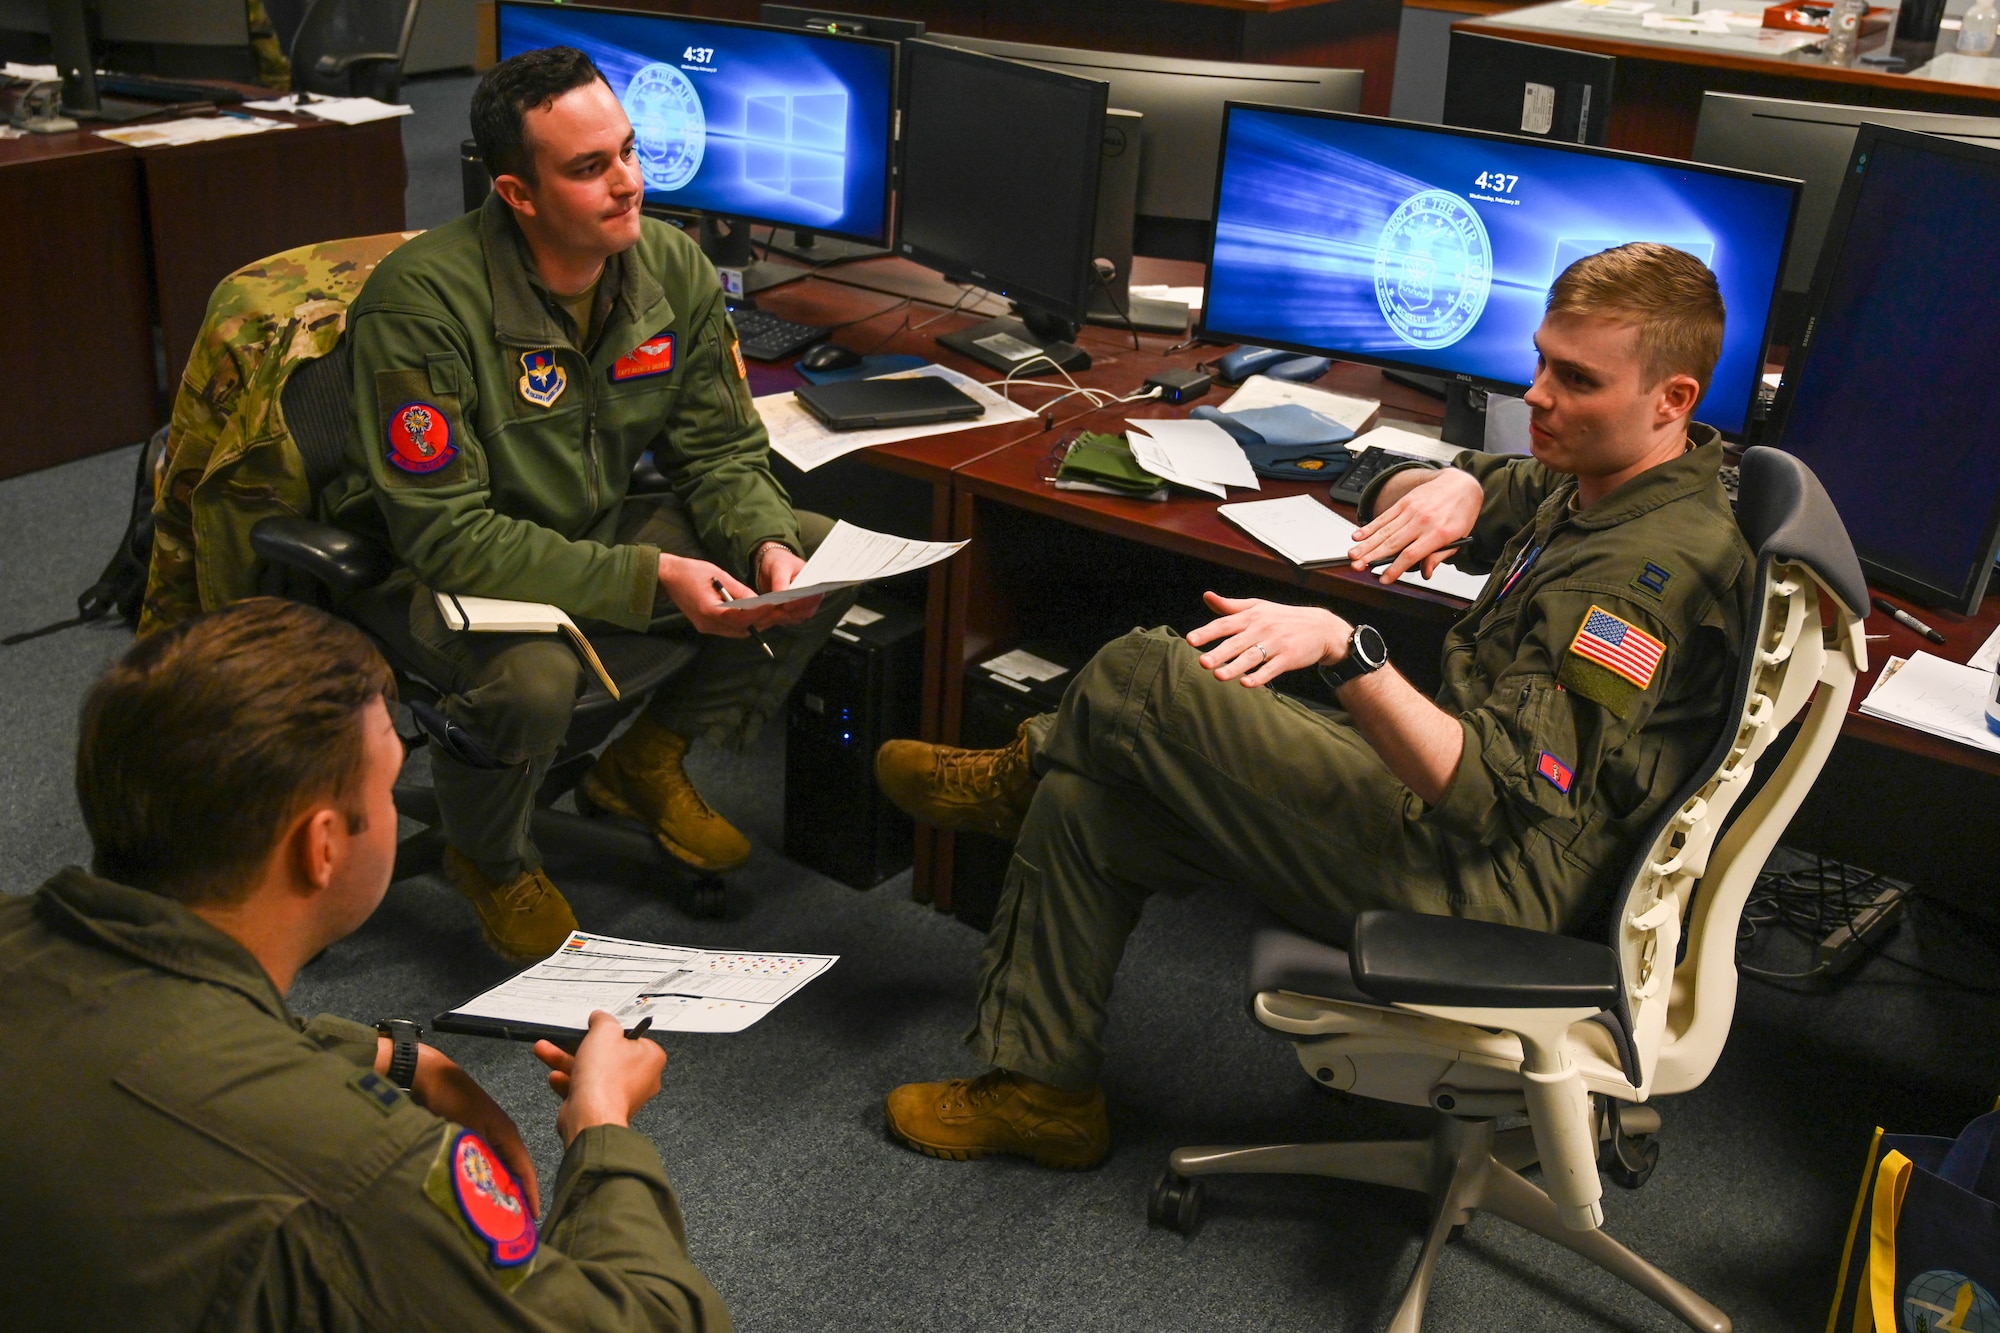 From right to left, U.S. Air Force Capt. Nathan Hartman, 58th Airlift Squadron (AS) instructor pilot, goes over questions from the mission brief with Capt. Andrew Butler, 58th AS instructor pilot, and Capt. Kameron Saranto Mercado, 58th AS instructor pilot, at Joint Base Lewis-McChord, Washington, Feb. 21, 2024. The Airmen participated in mission planning and flew a C-17 Globemaster III during a large formation exercise. (U.S. Air Force photo by Senior Airman Trenton Jancze)